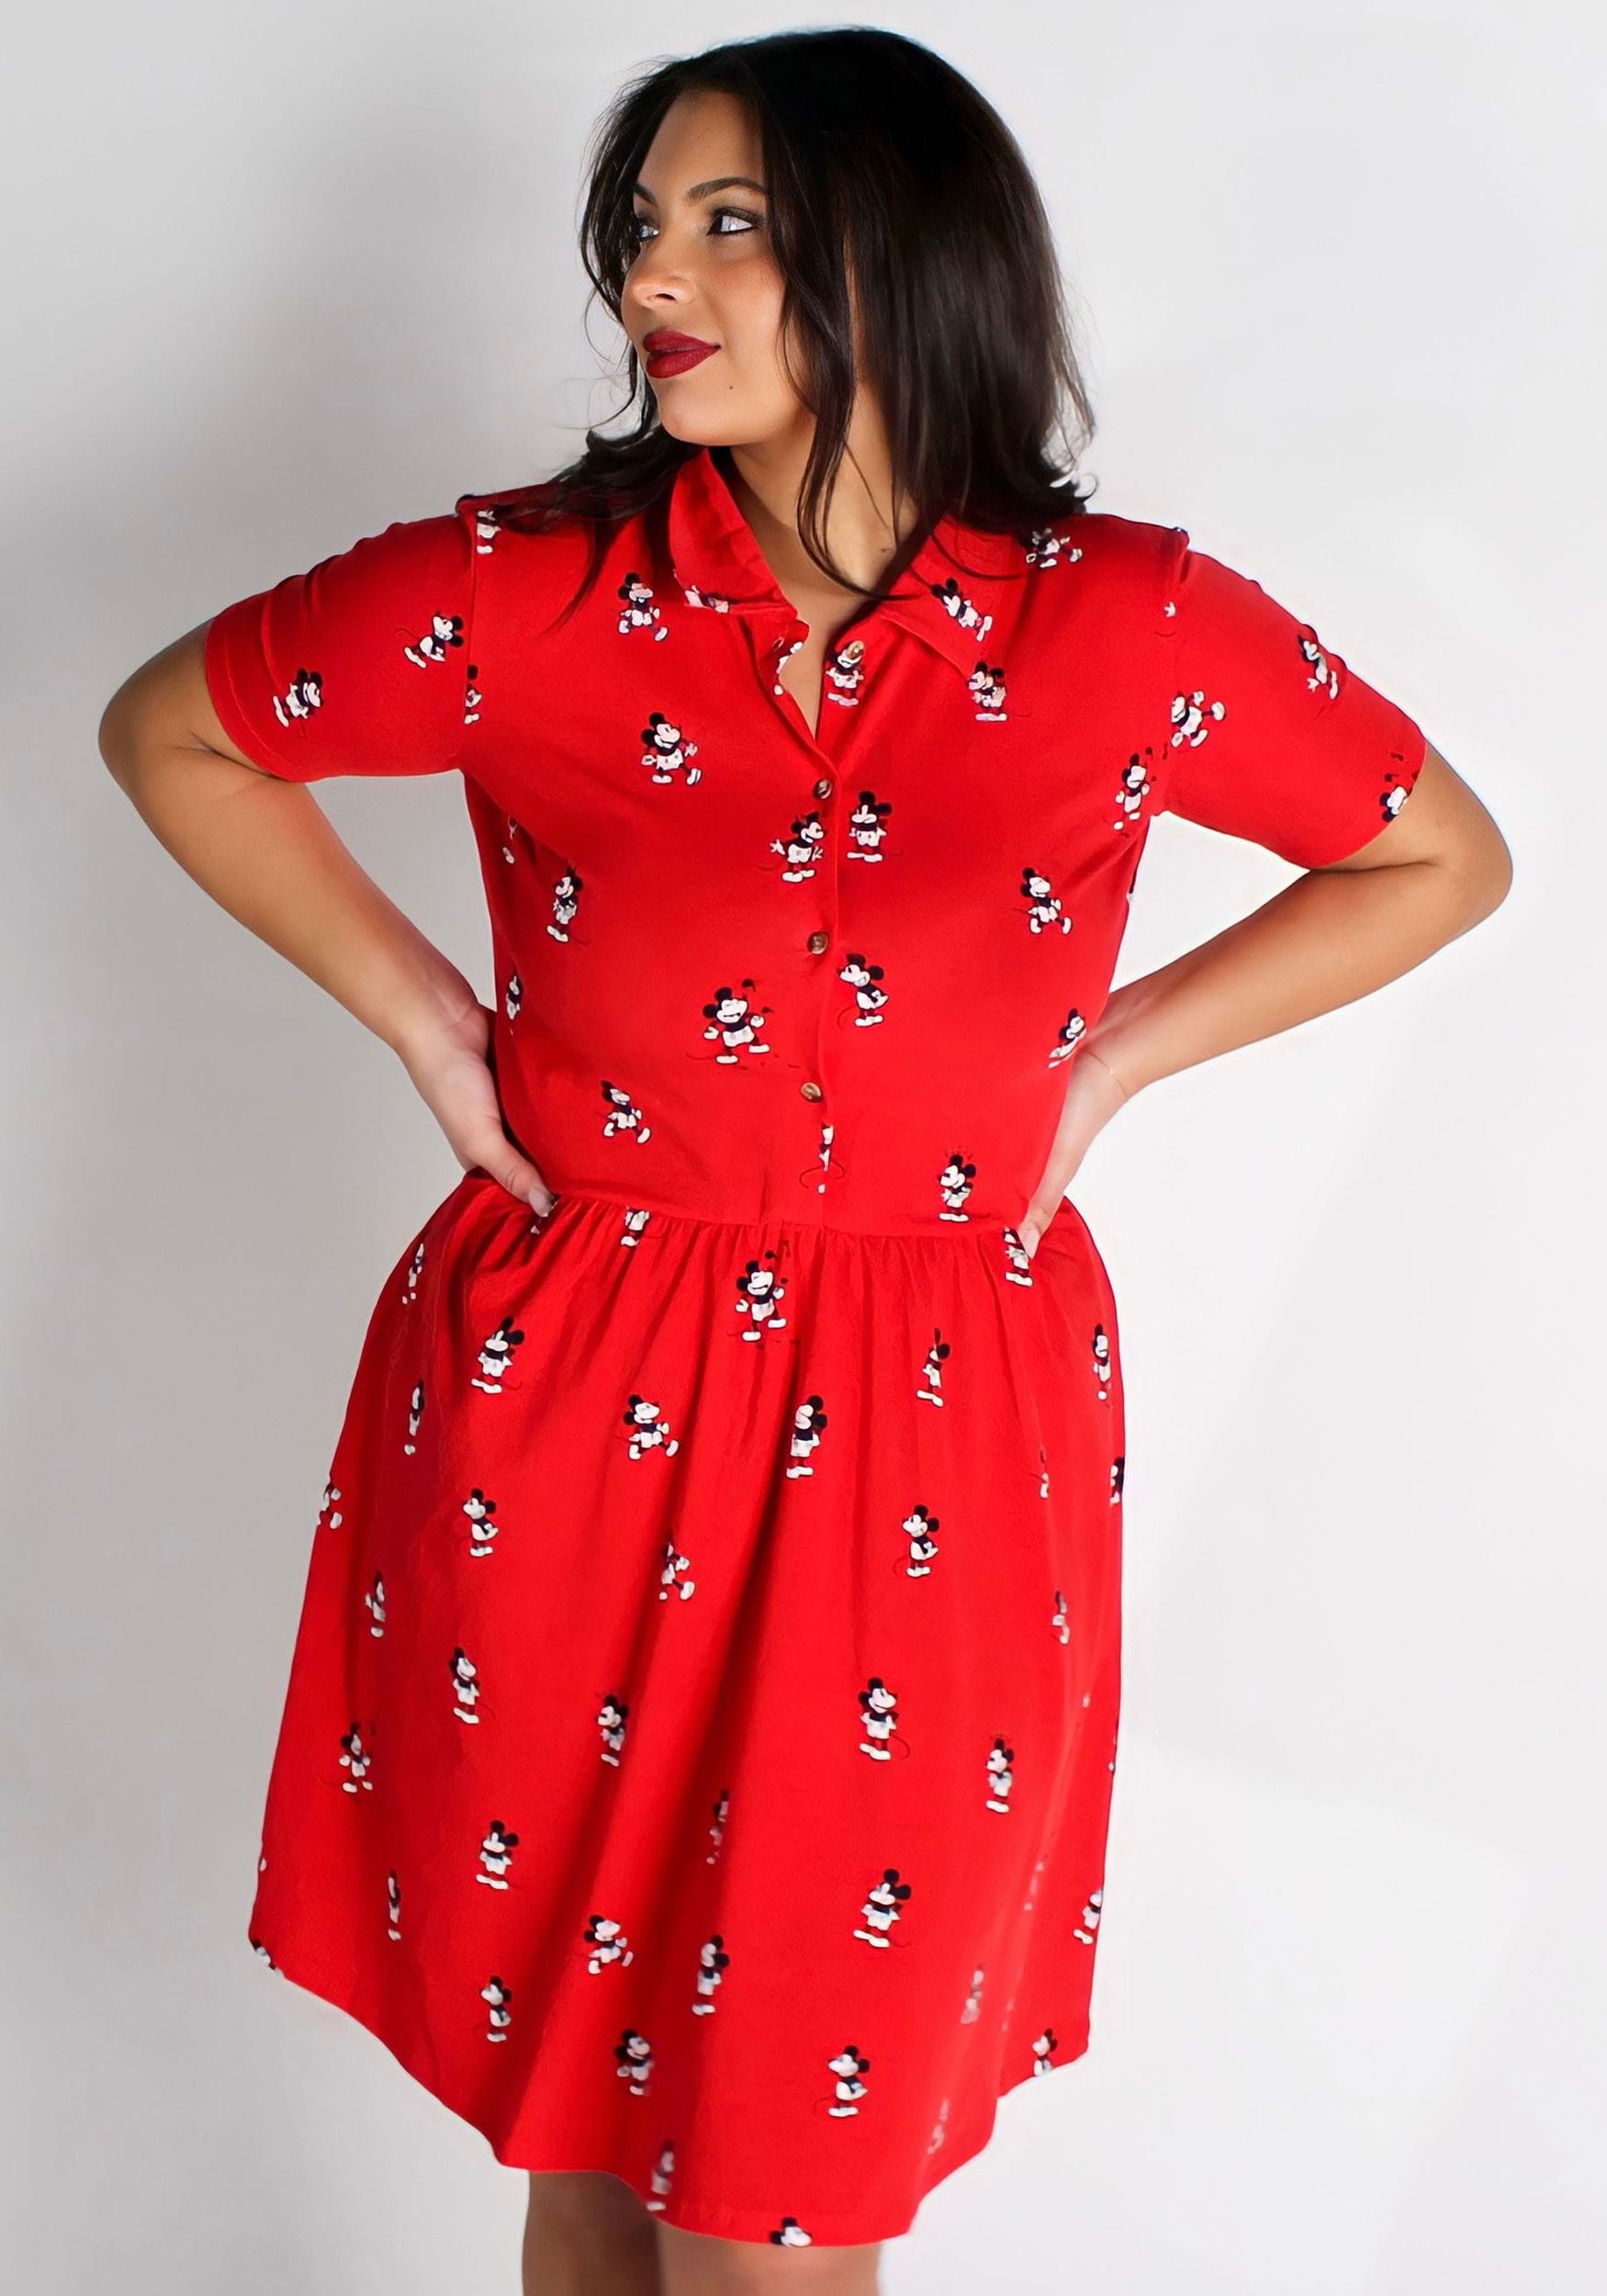 Cakeworthy Mickey Mouse Tie Up Women's Jumpsuit